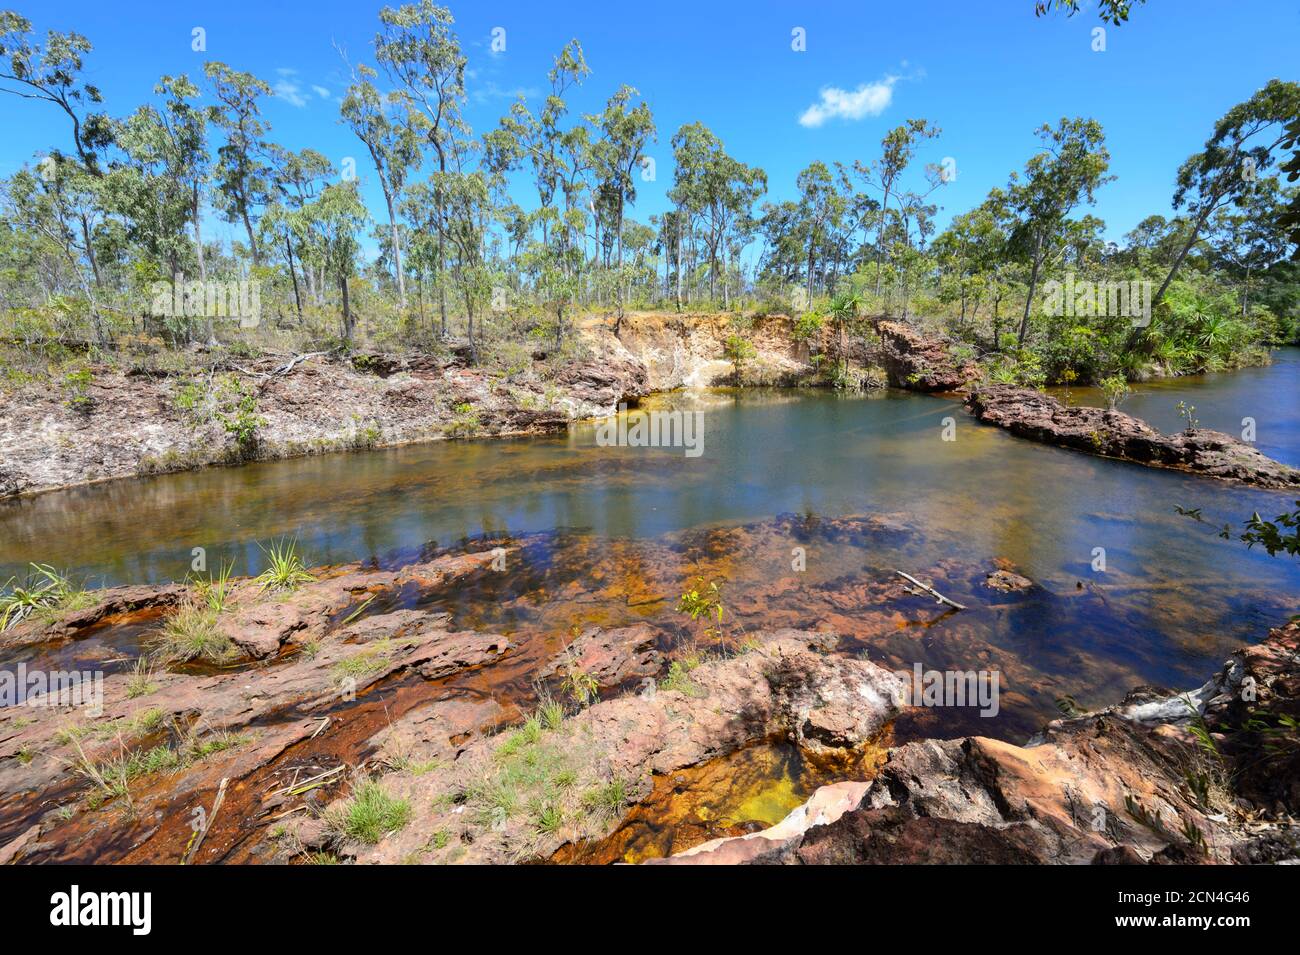 Scenic view of the Giddy River, East Arnhem Land, Northern Territory, NT, Australia Stock Photo